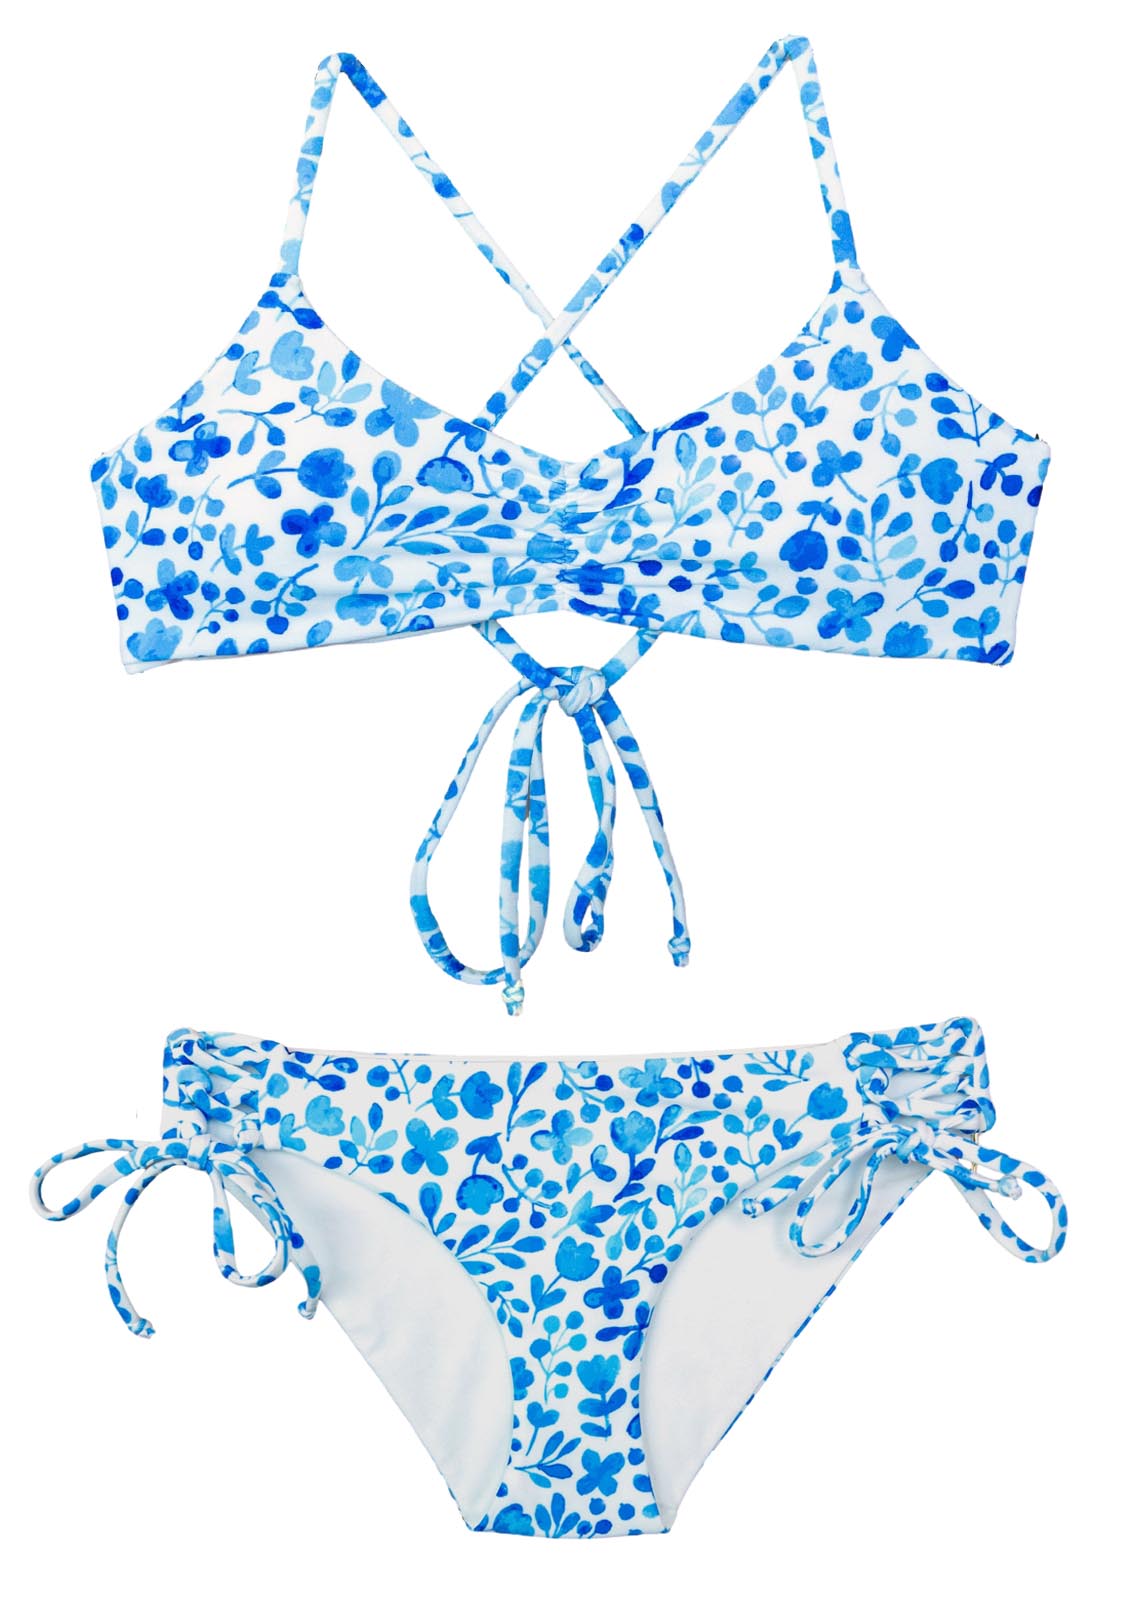 Full coverage swimsuit but still generation Z, this blue and white floral bikini is a girls' perfect swimsuit